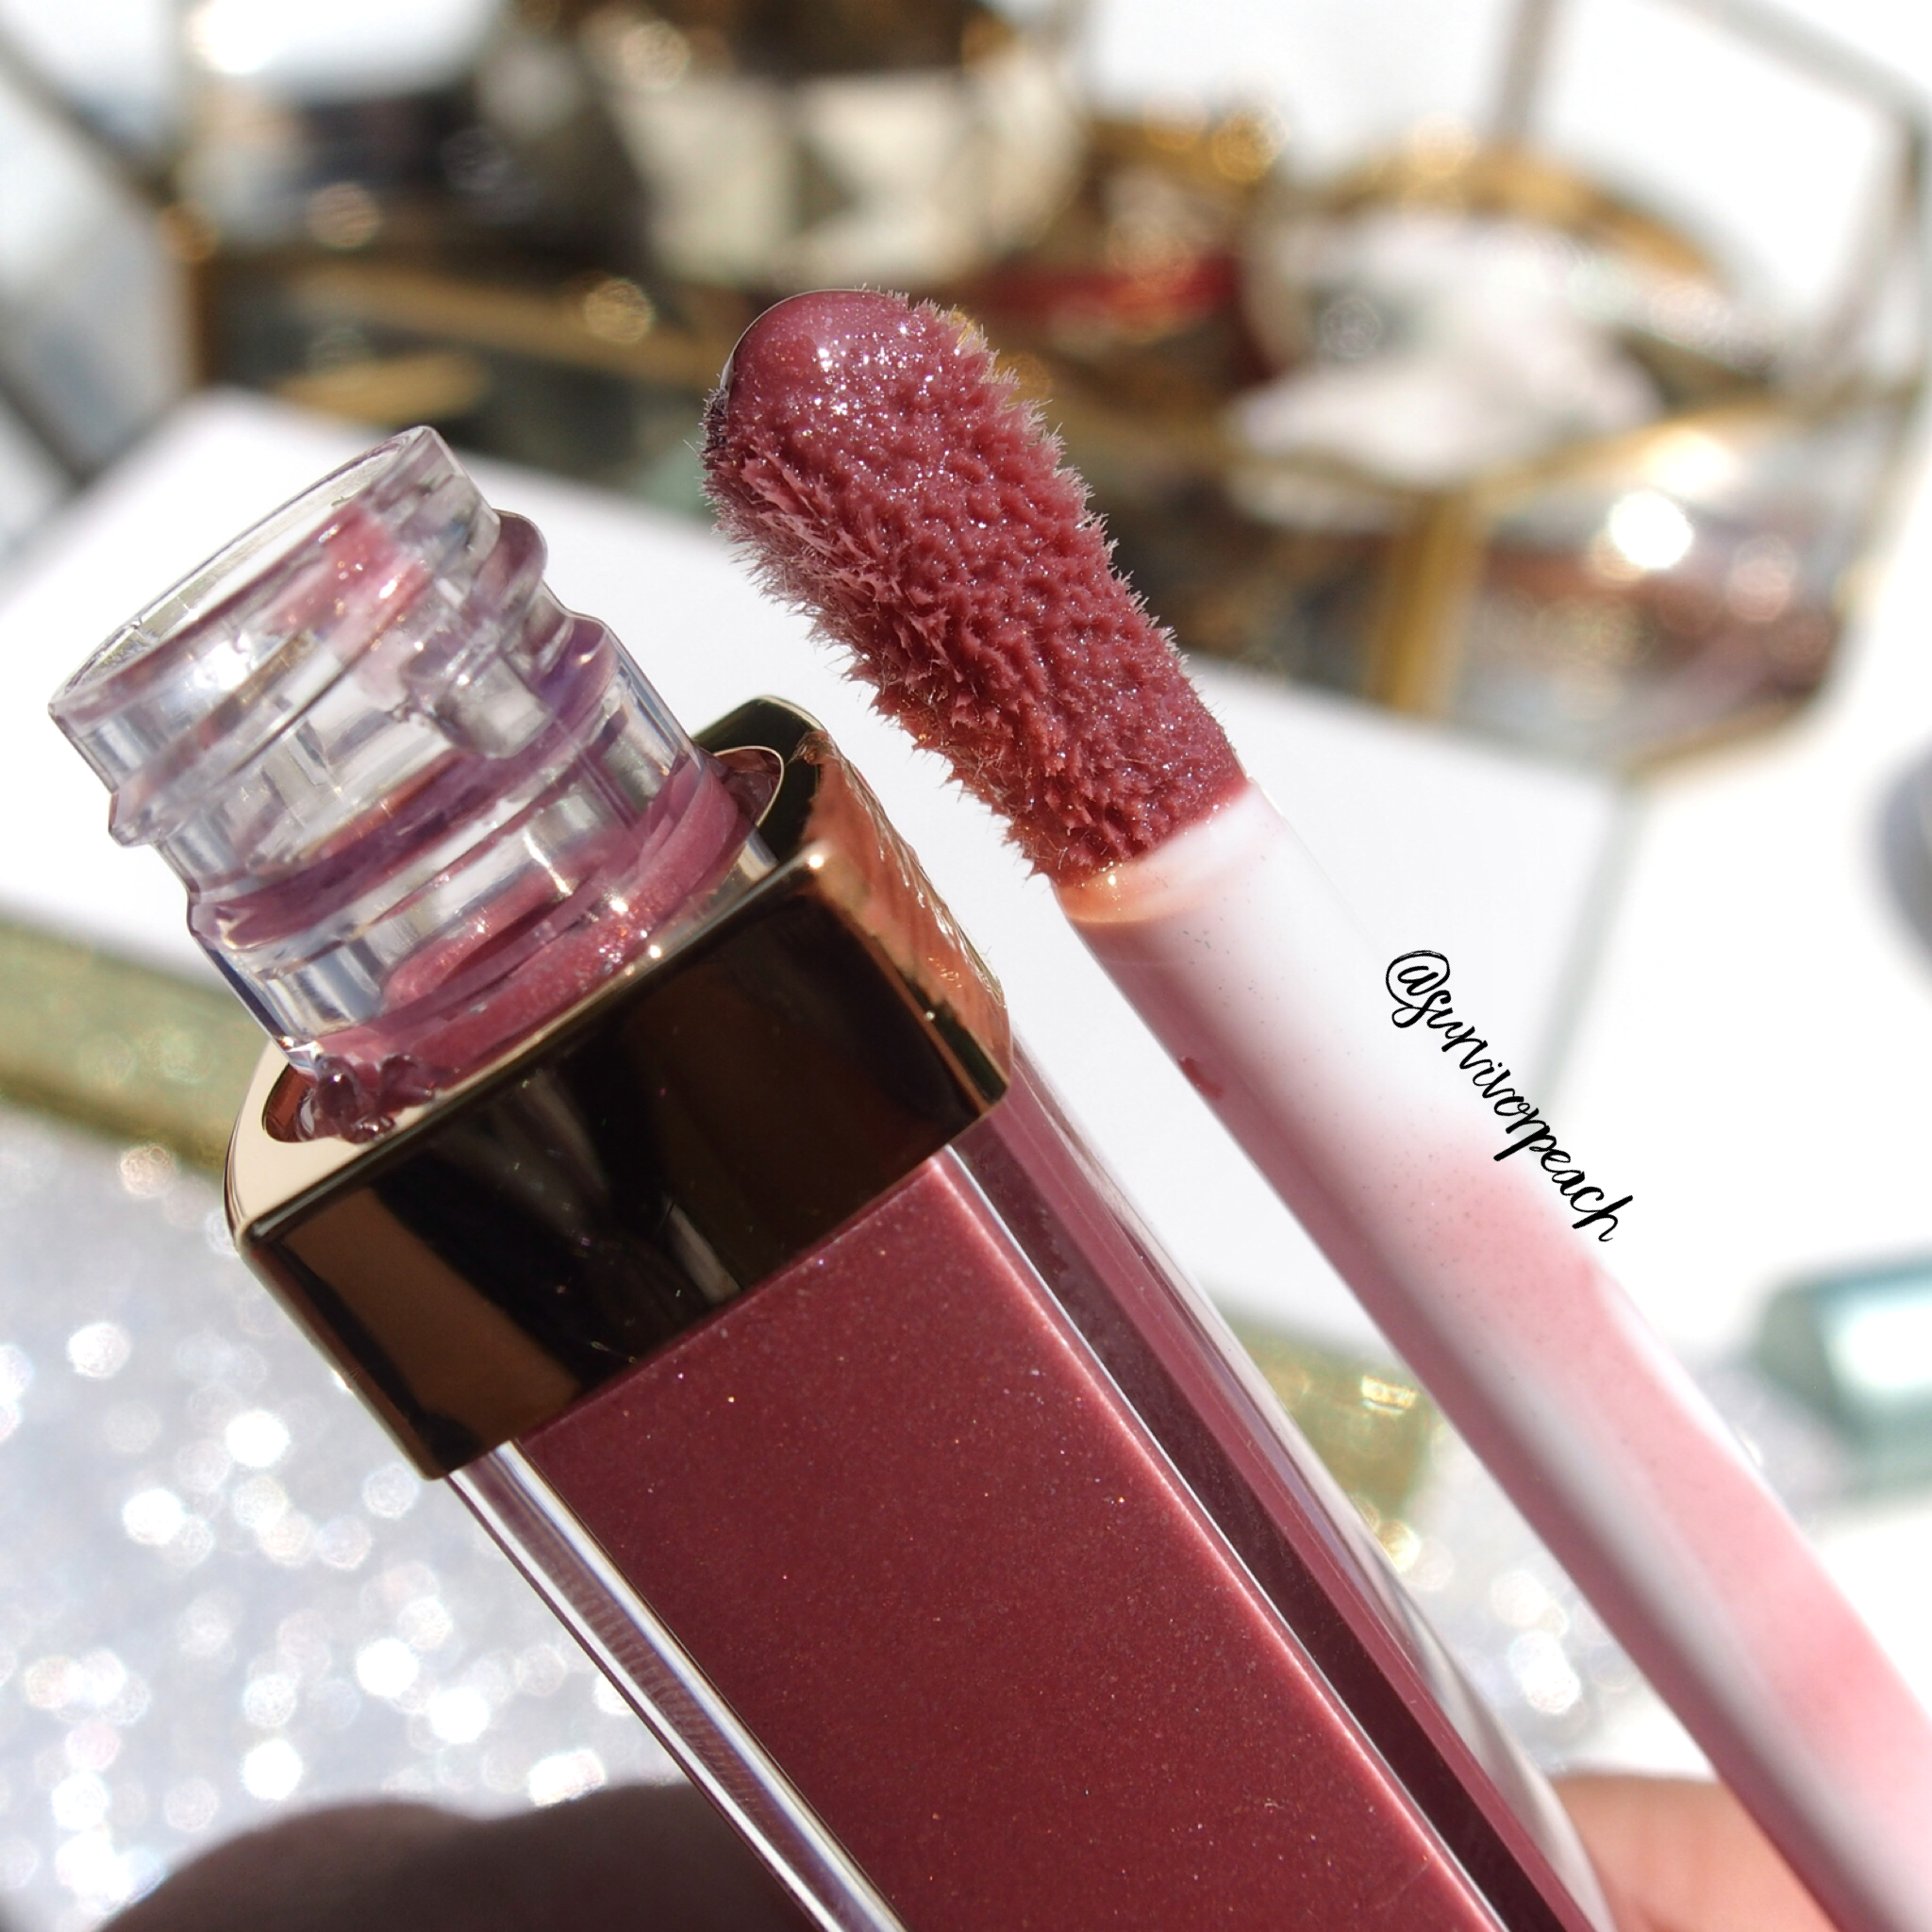 Chanel Emilienne (452) Rouge Coco Lipstick (2015) Review & Swatches